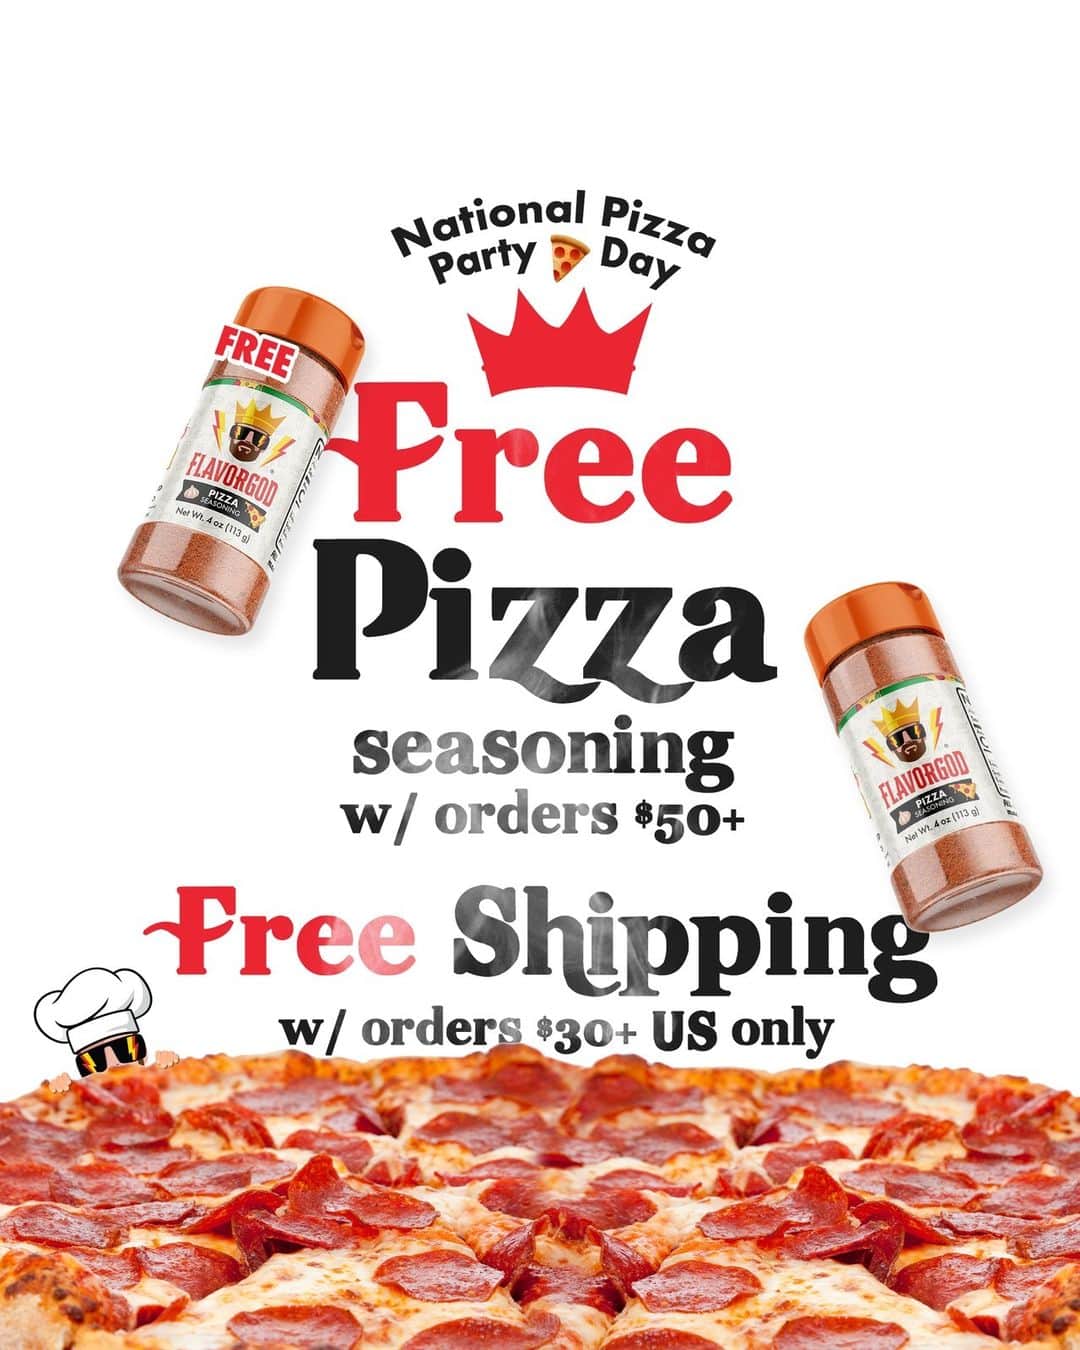 Flavorgod Seasoningsのインスタグラム：「🍕SALE!! National Pizza Party Day - Free Pizza Seasoning with orders $50+ & Free Shipping orders $30+ US ONLY ⁠Shop Now!!⁠ Click link in the bio -> @flavorgod | www.flavorgod.com⁠ 🍕⁠ -⁠ Flavor God Seasonings are:⁠ 🍕ZERO CALORIES PER SERVING⁠ 🍕MADE FRESH⁠ 🍕MADE LOCALLY IN US⁠ 🍕FREE GIFTS AT CHECKOUT⁠ 🍕GLUTEN FREE⁠ 🍕#PALEO & #KETO FRIENDLY⁠ -⁠ #food #foodie #flavorgod #seasonings #glutenfree #mealprep #seasonings #breakfast #lunch #dinner #yummy #delicious #foodporn」